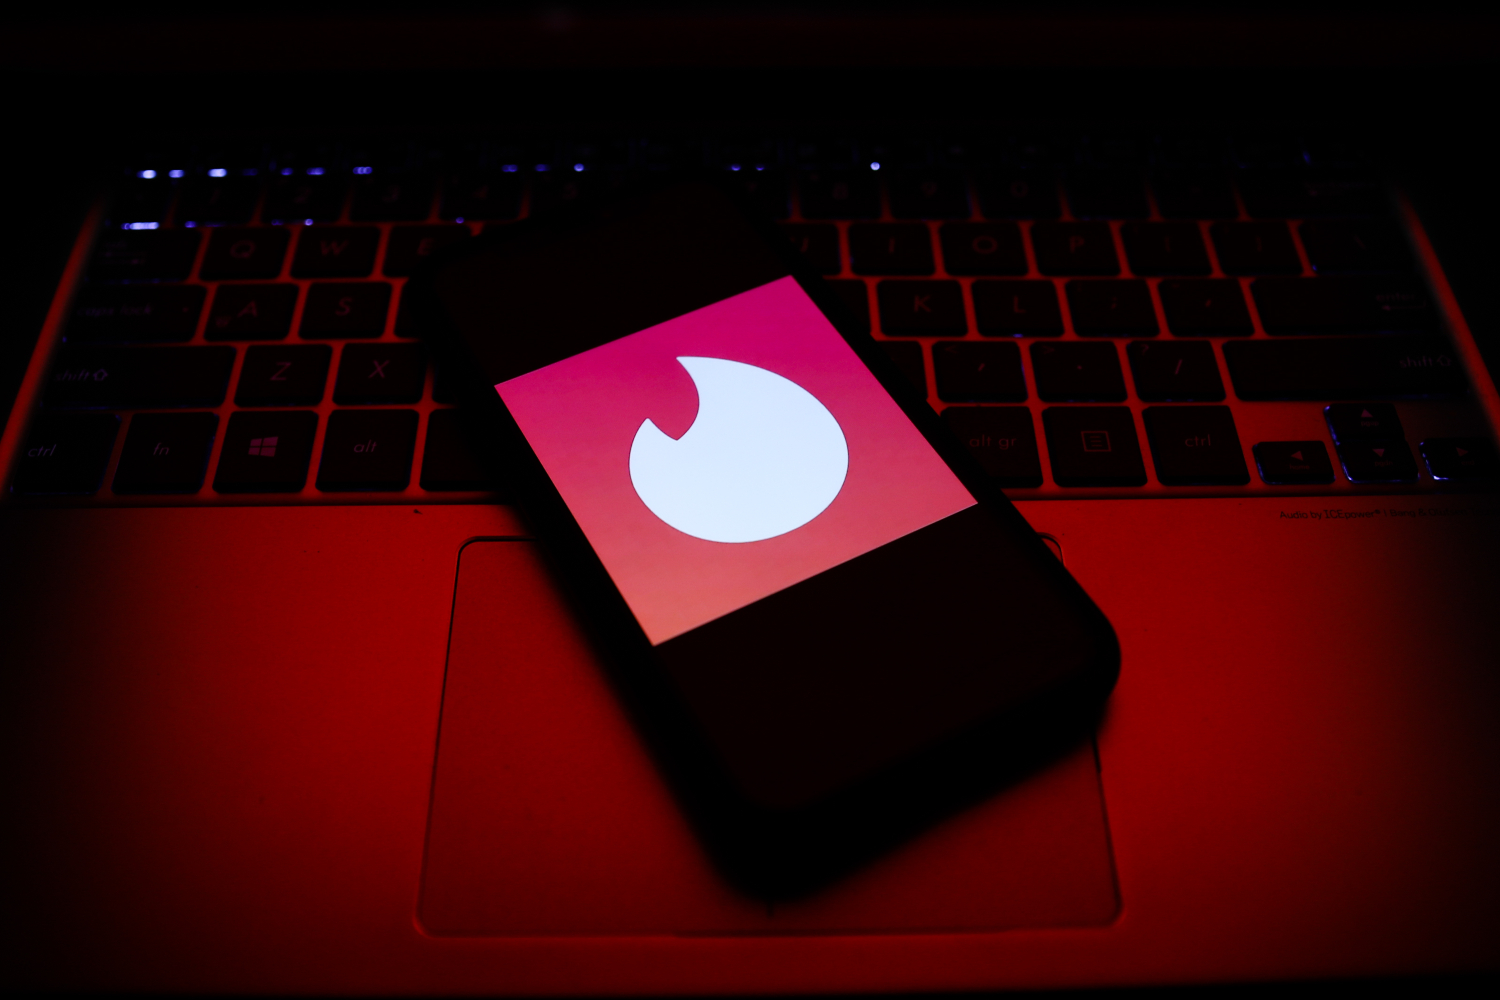 Tinder logo displayed on a phone screen is seen in this illustration photo